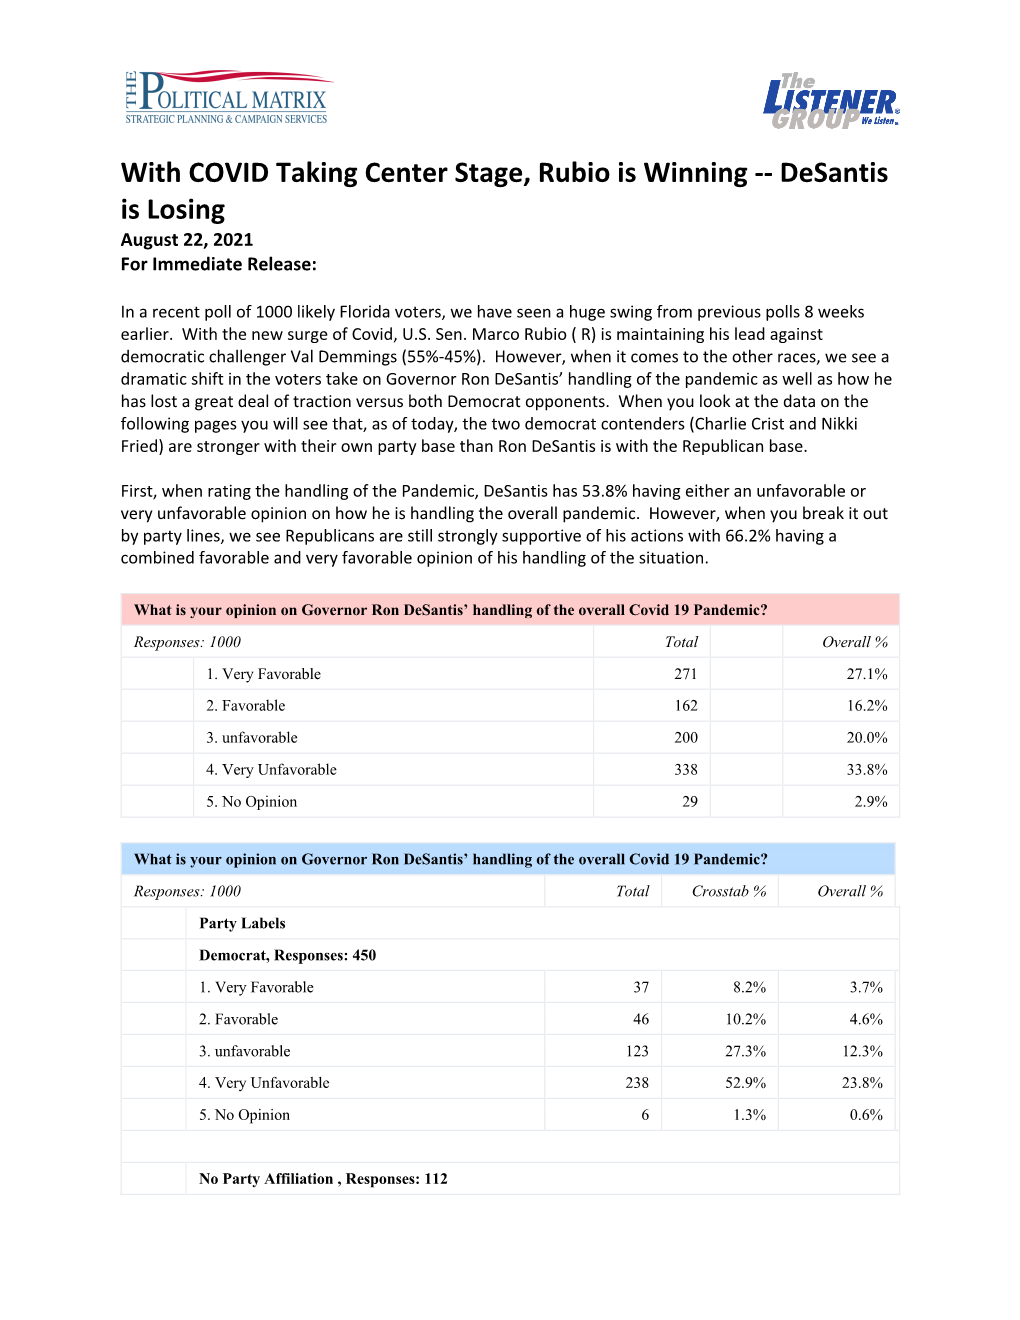 With COVID Taking Center Stage, Rubio Is Winning -- Desantis Is Losing August 22, 2021 for Immediate Release